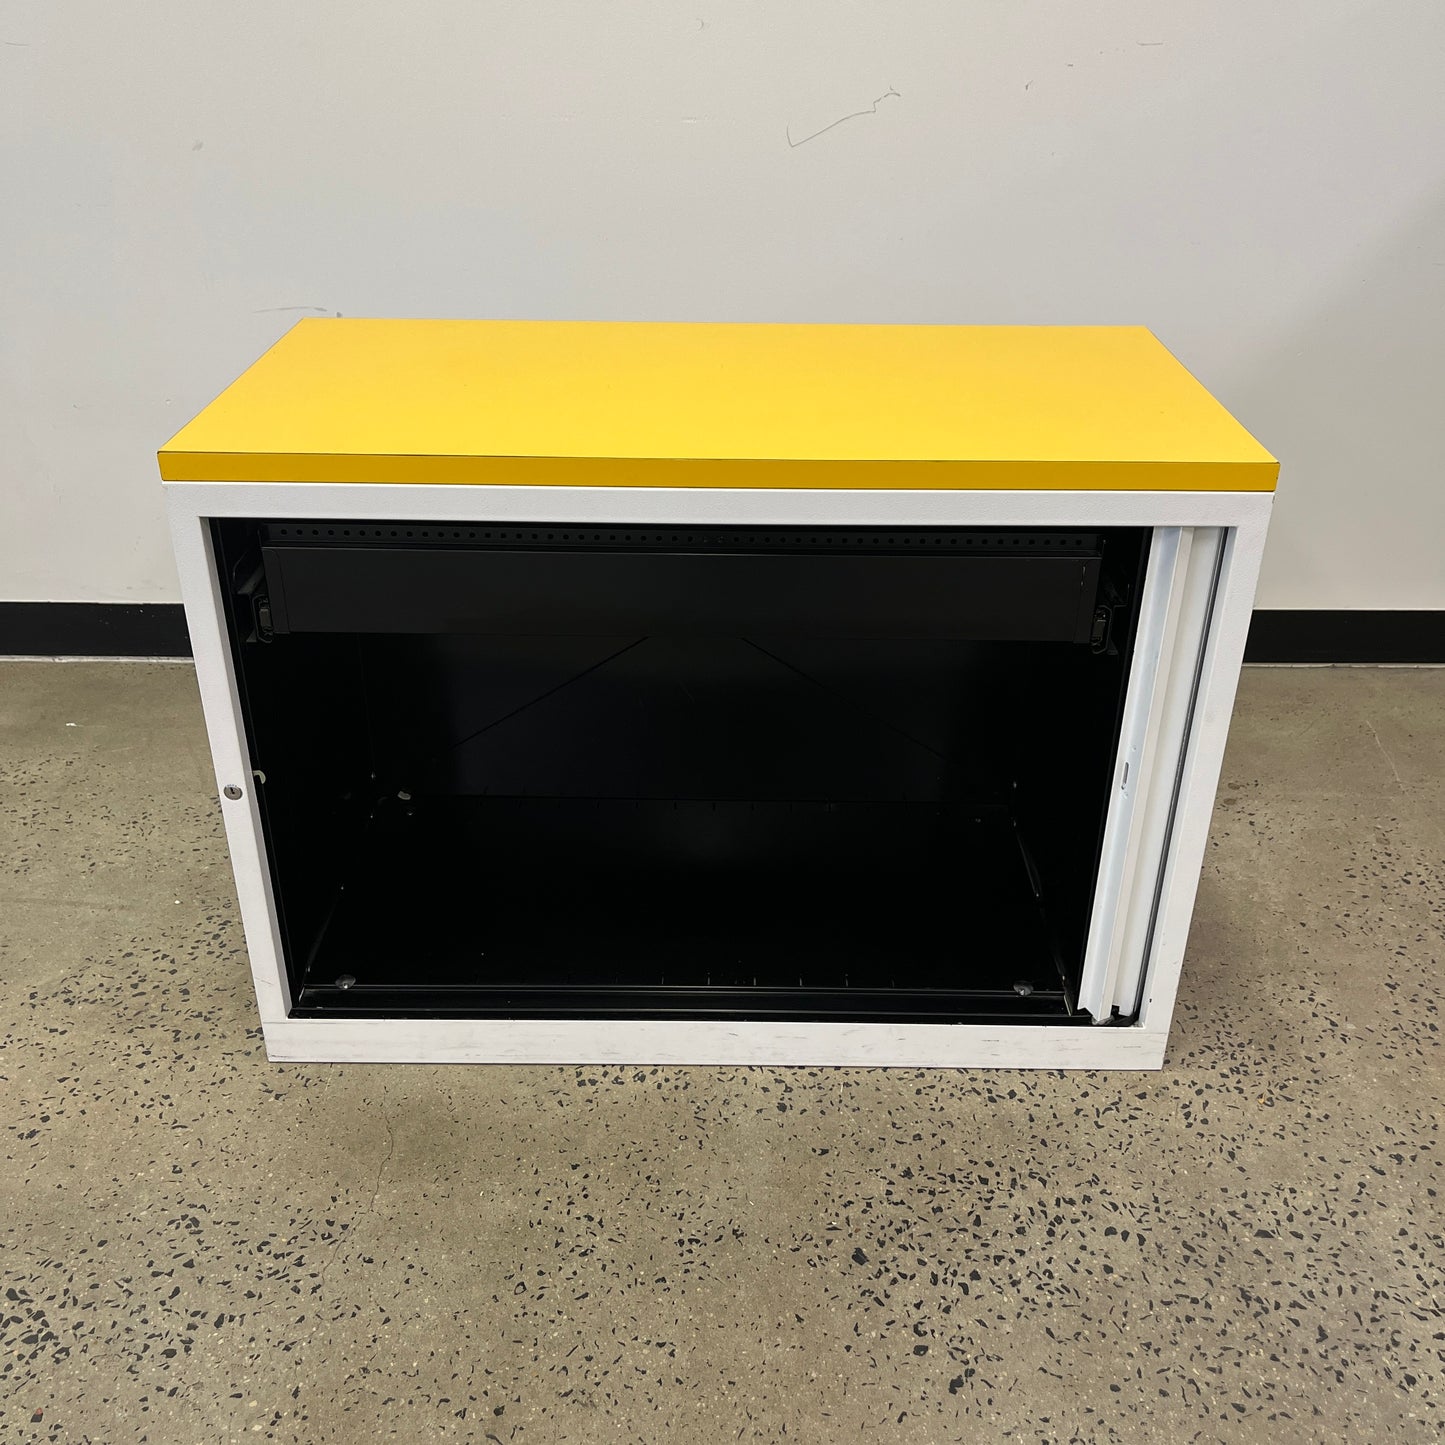 Bosco Low White Tambour Cabinet Yellow Top with Drawer